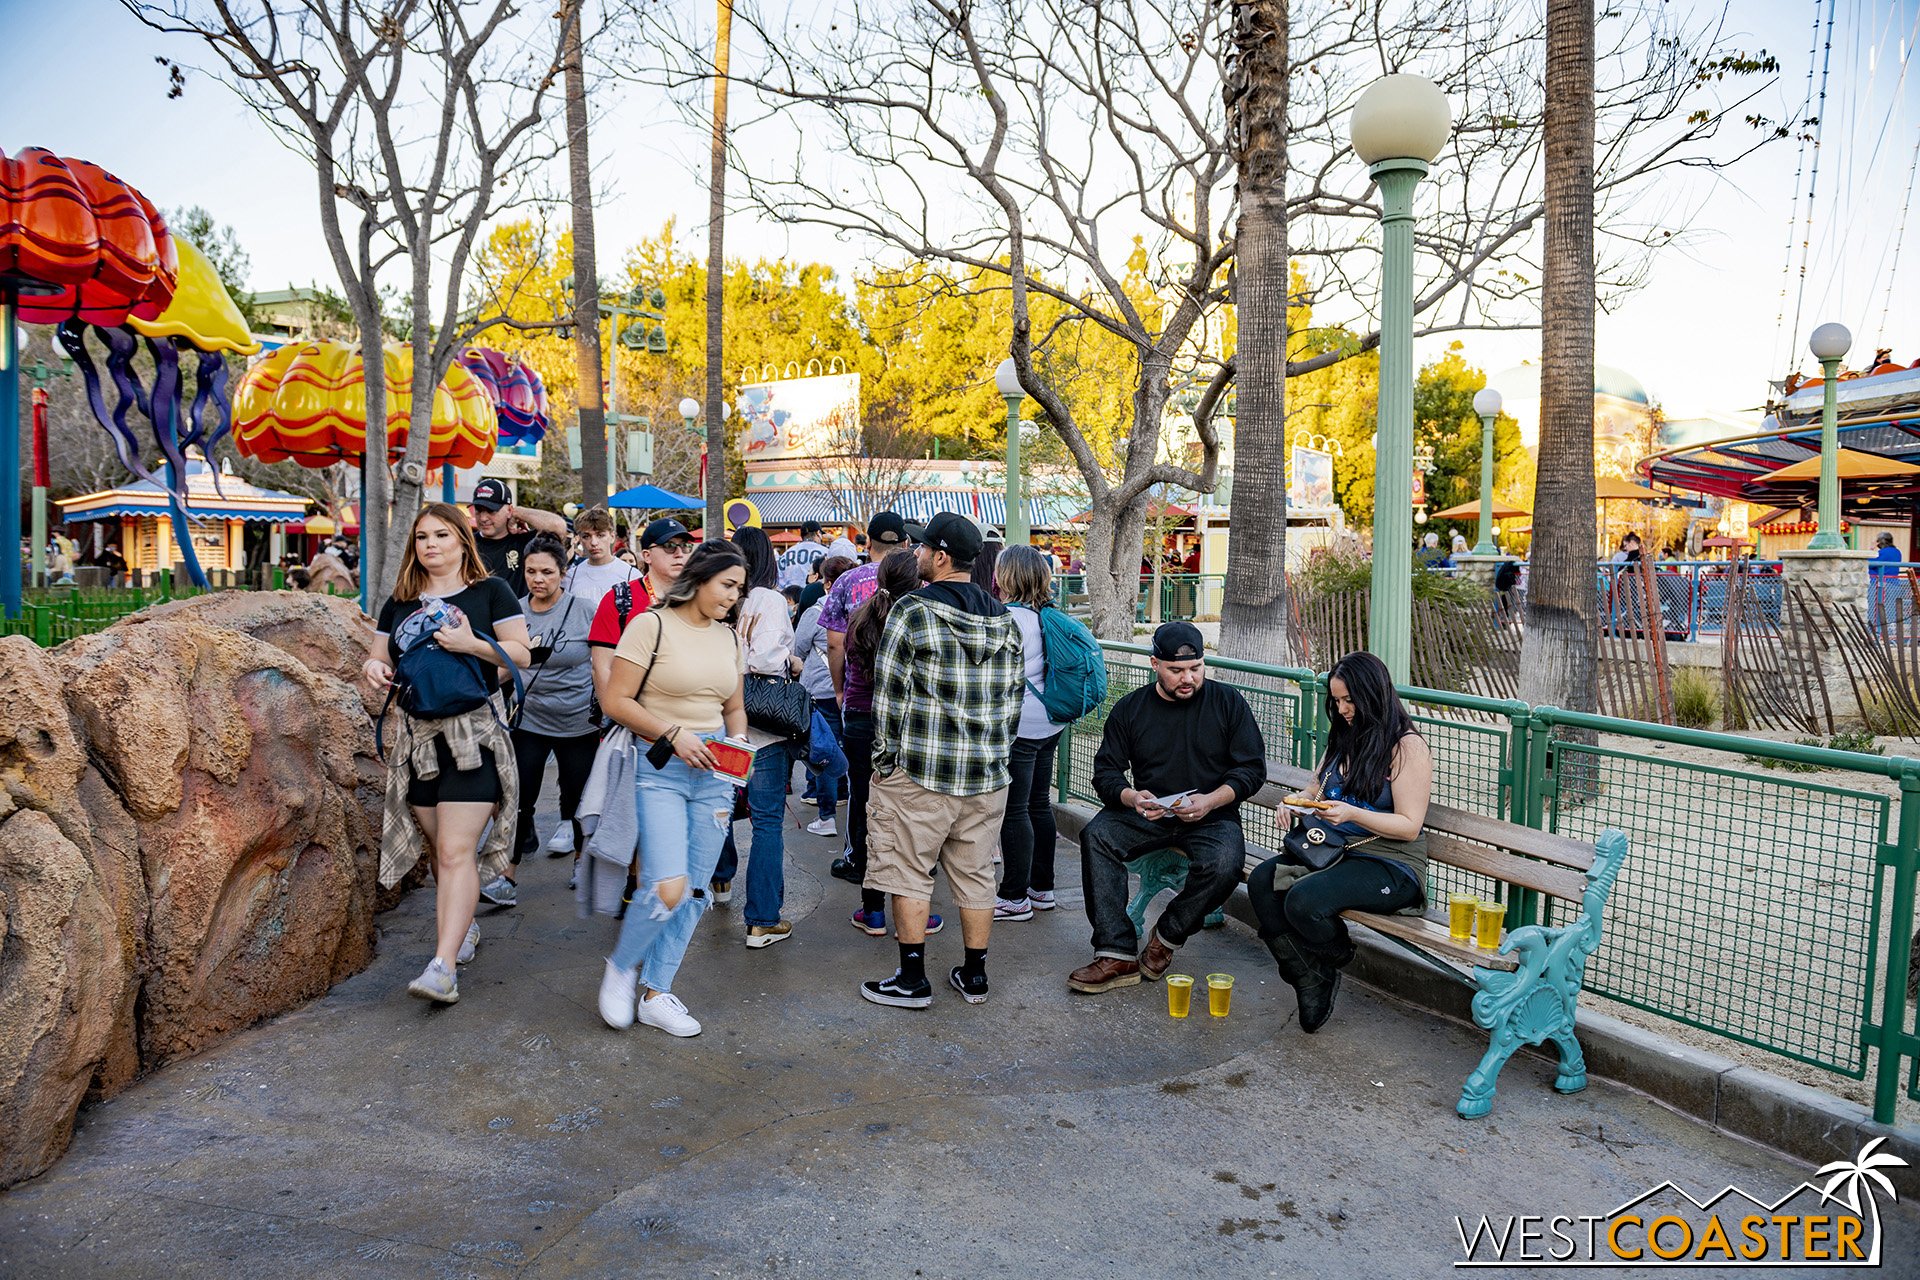  This length matches what we saw opening weekend.  But fortunately, the pick-up line was much shorter.  In fact, in the last photo in the previous section, the line was stretching to the middle of the World of Color viewing area but was only a dozen 